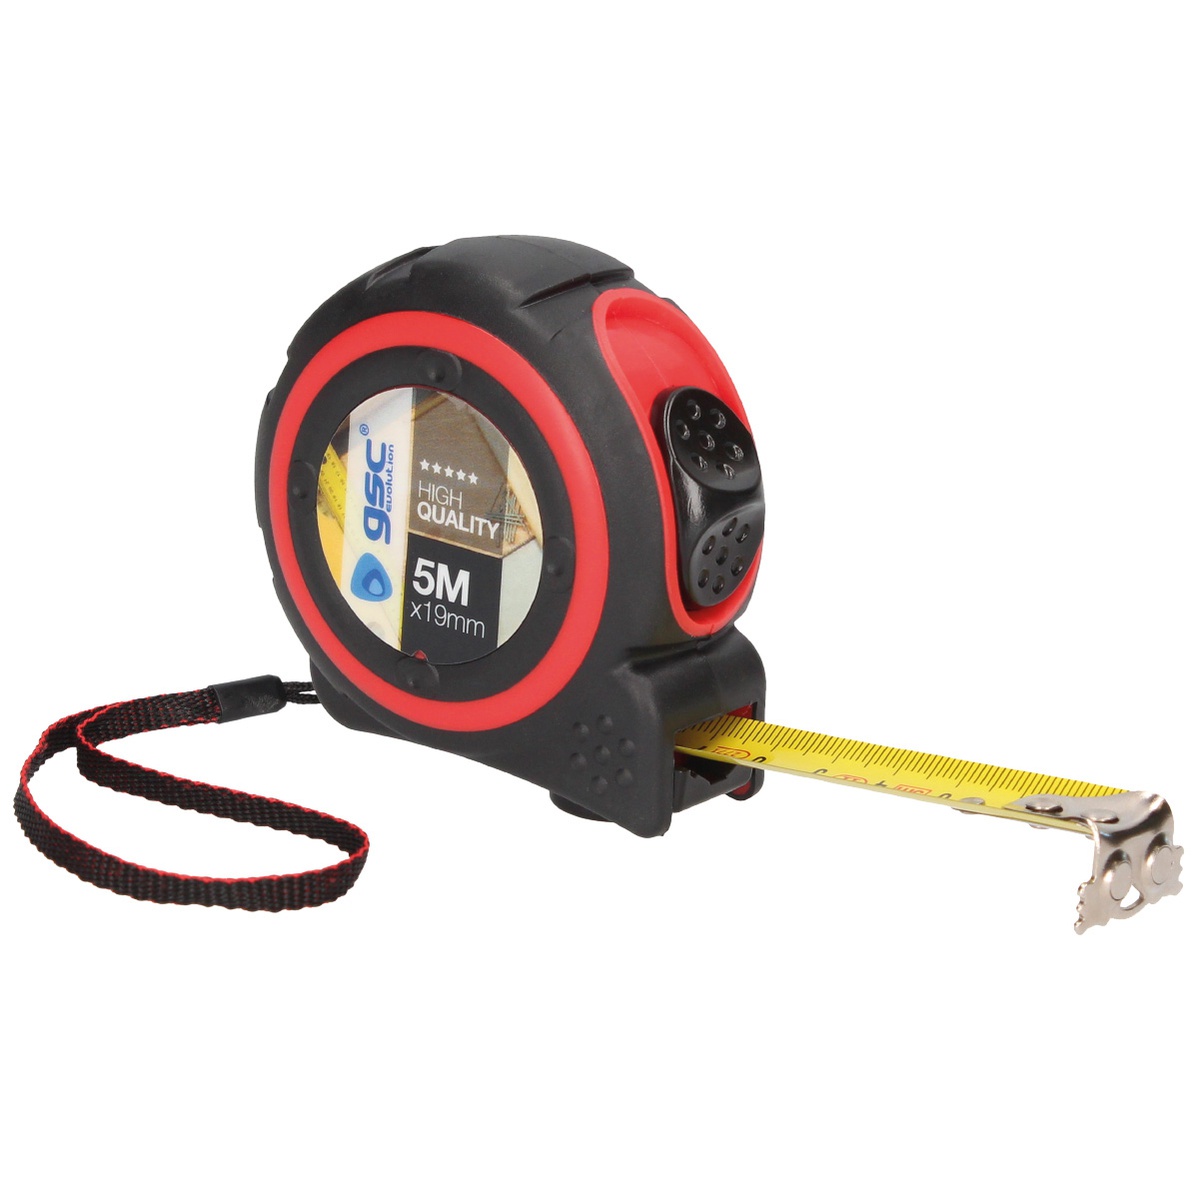 Contractor Rubber Tape Measure with magnet and stop button- 19mm - 5M